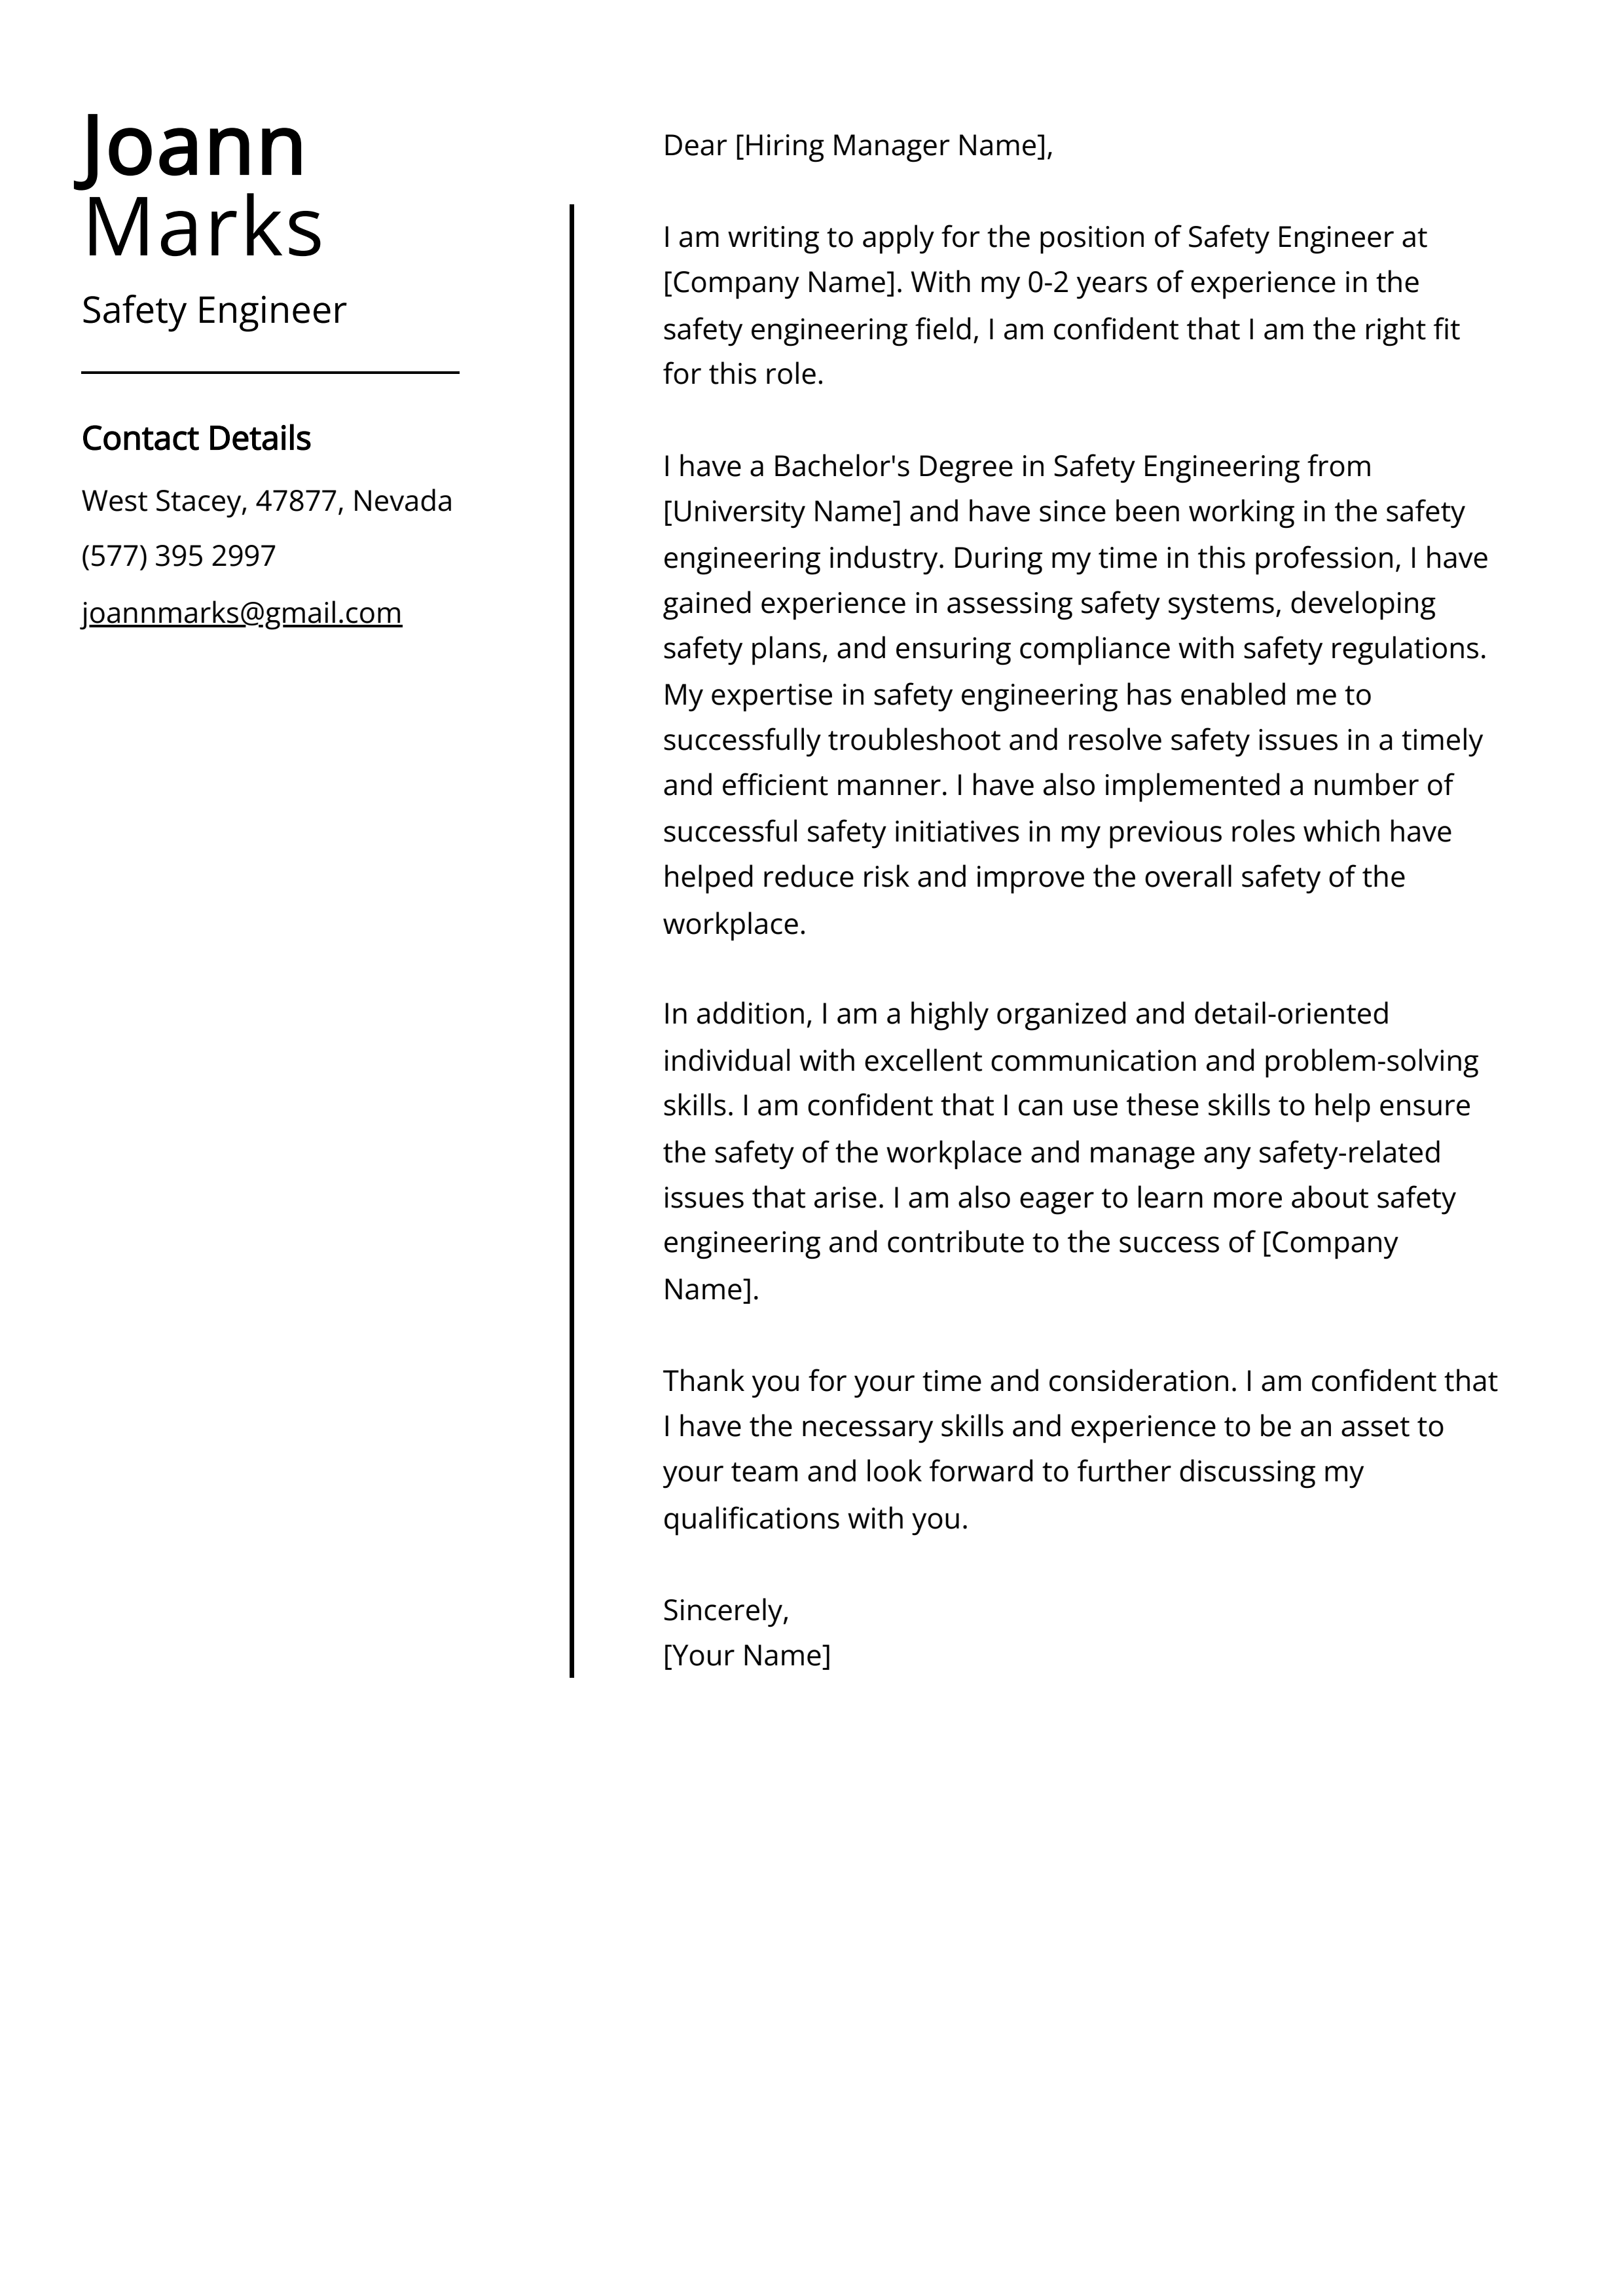 Safety Engineer Cover Letter Example